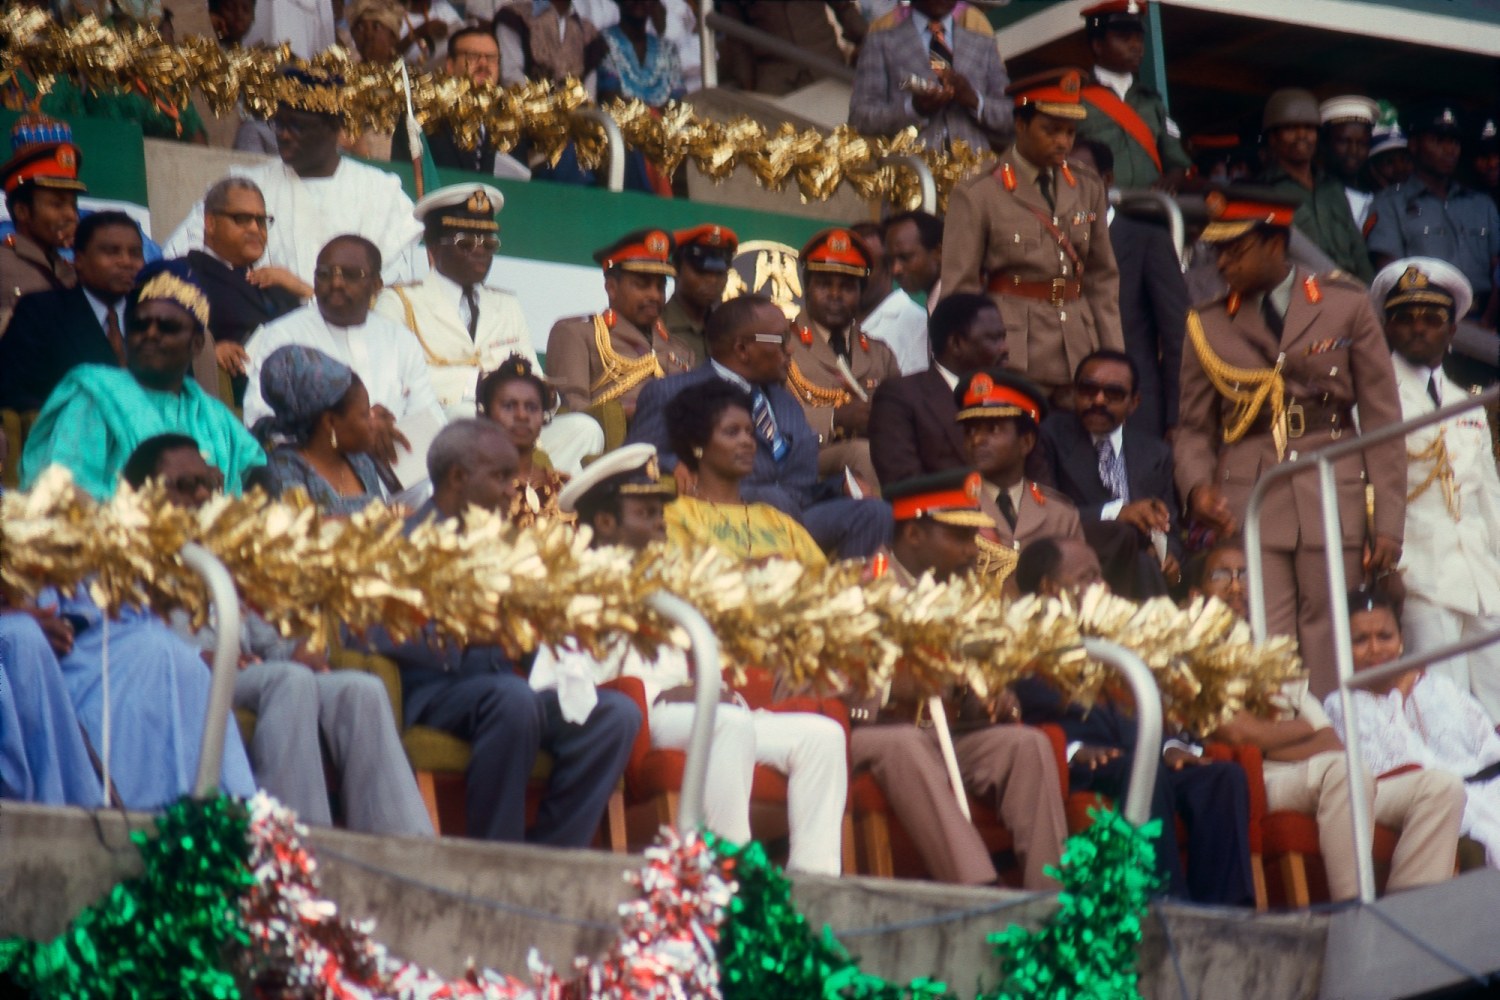 Roy Lewis (b. 1937)
Lt. General Oluse Gun Obasanjo and FESTAC Officials on Viewing Stage, Opening Day, 1977
Archival inkjet print on Simply Elegant Gold Fibre paper
Image: 13 3/4 x 20 inches (34.9 x 50.8 cm) Sheet: 17 x 22 inches (43.2 x 55.9 cm)
Framed: 18 5/8 &amp;times; 25 3/8 &amp;times; 1 1/2 inches (47.3 &amp;times; 64.5 &amp;times; 3.8 cm)
Edition of 5, printed 2023